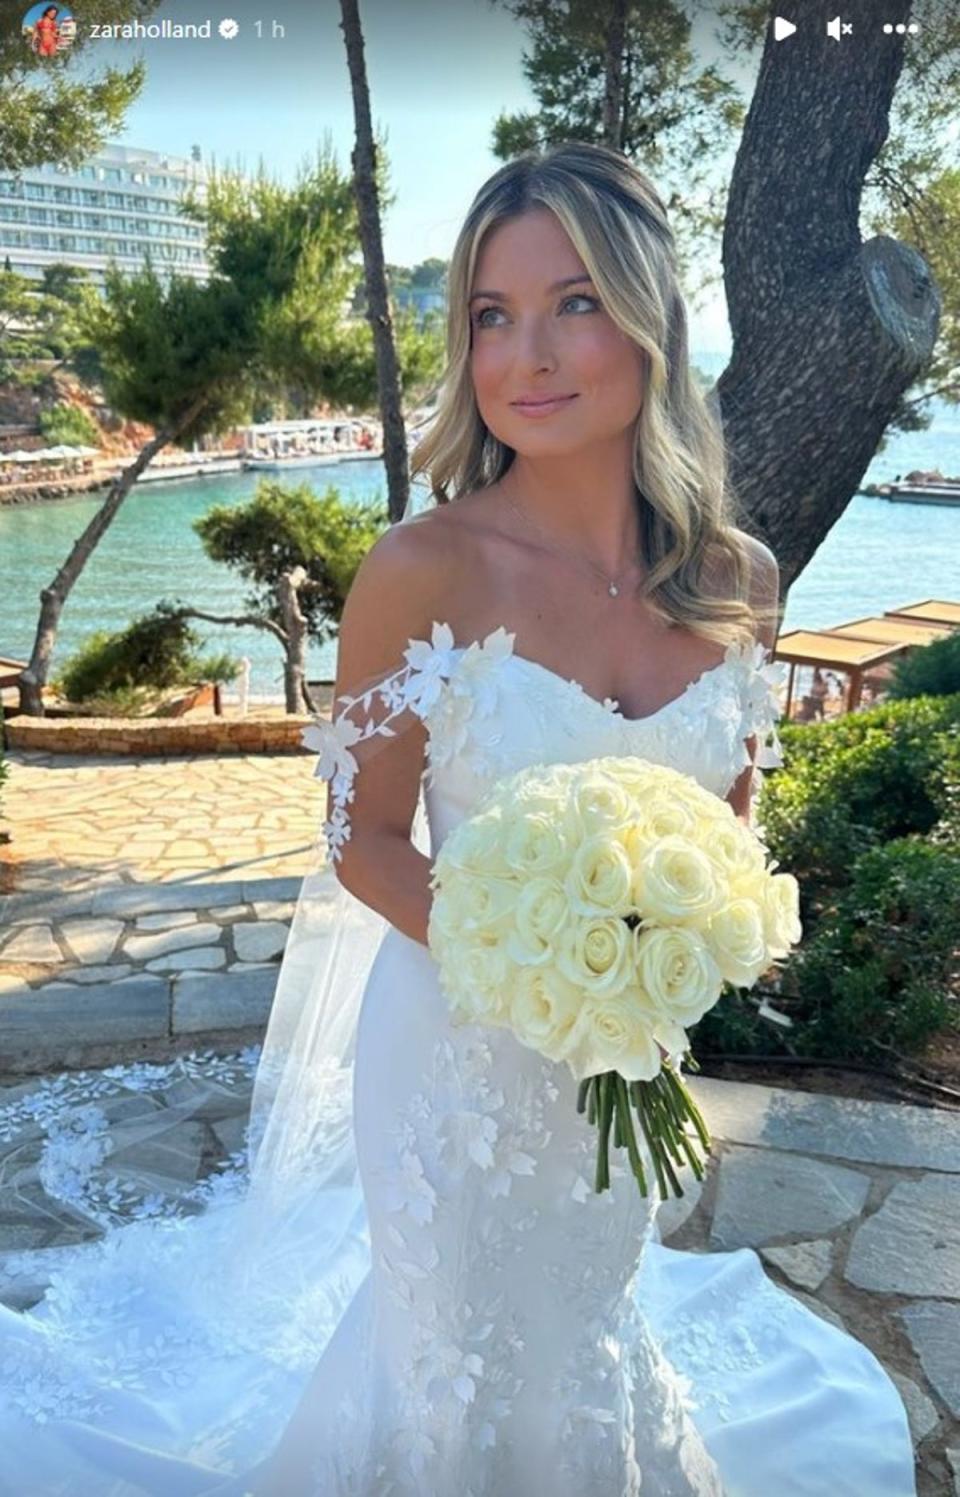 The former reality TV star shared photos of her wedding day on Instagram (Instagram/Zara Holland)